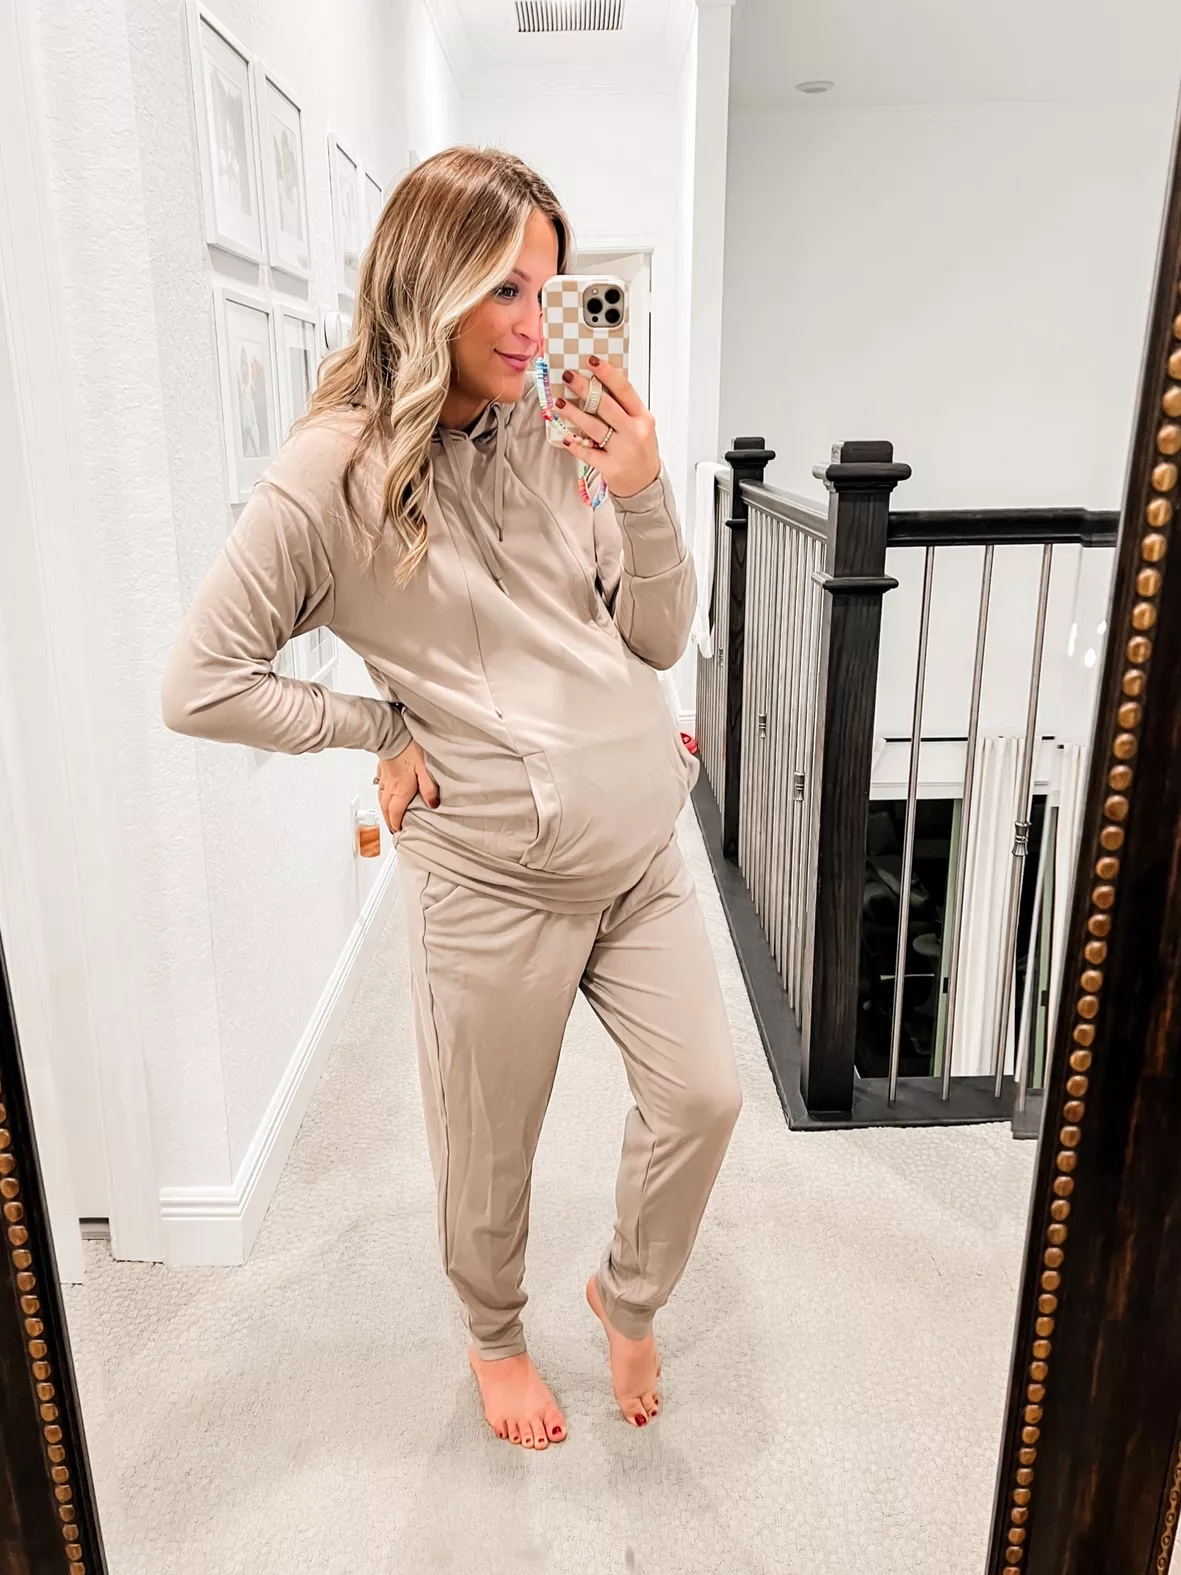 Maternity jumpsuit with nursing access